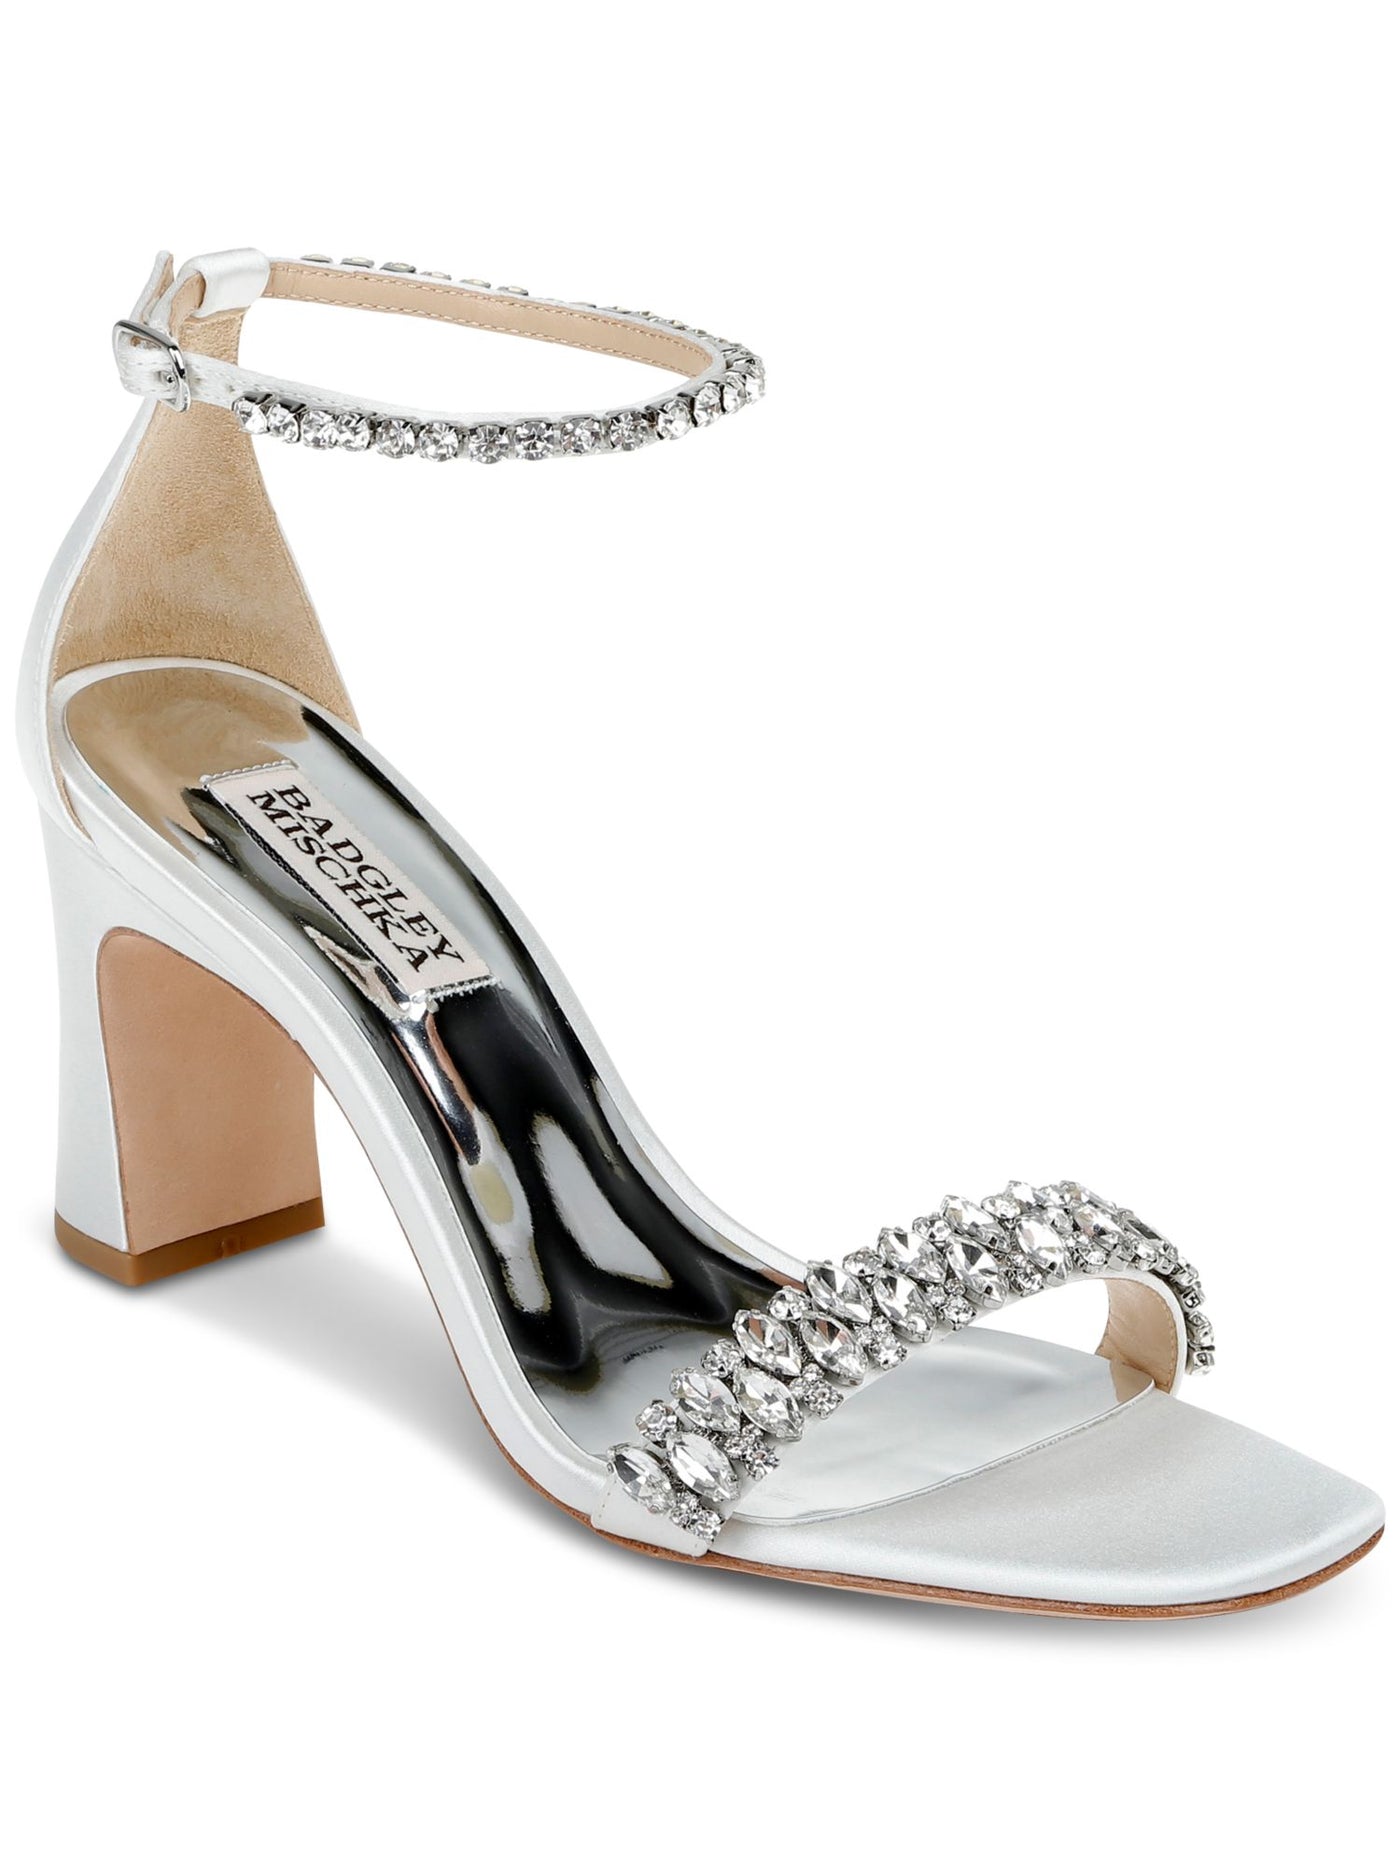 BADGLEY MISCHKA Womens White Textile Metallic Crystal Embellished Straps Ankle Strap Padded Harriet Square Toe Block Heel Buckle Dress Sandals Shoes 11 M